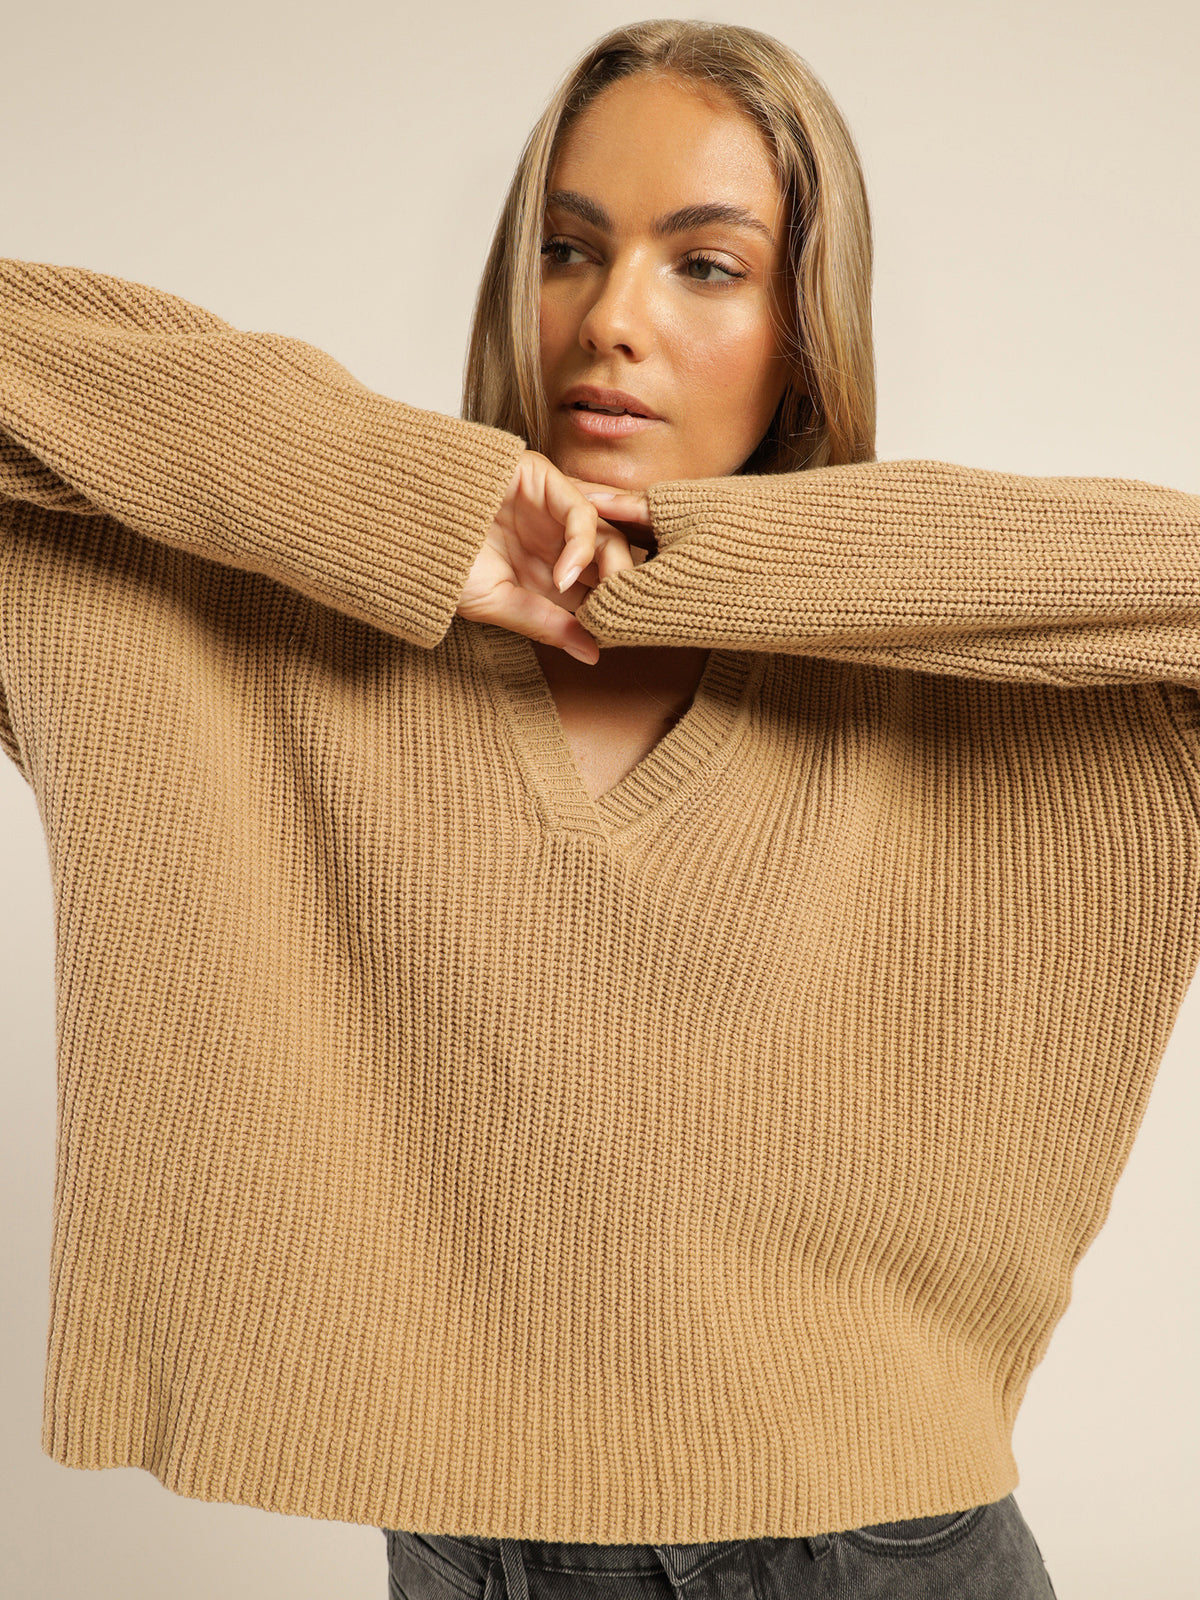 Addison Polo Knit in Camel